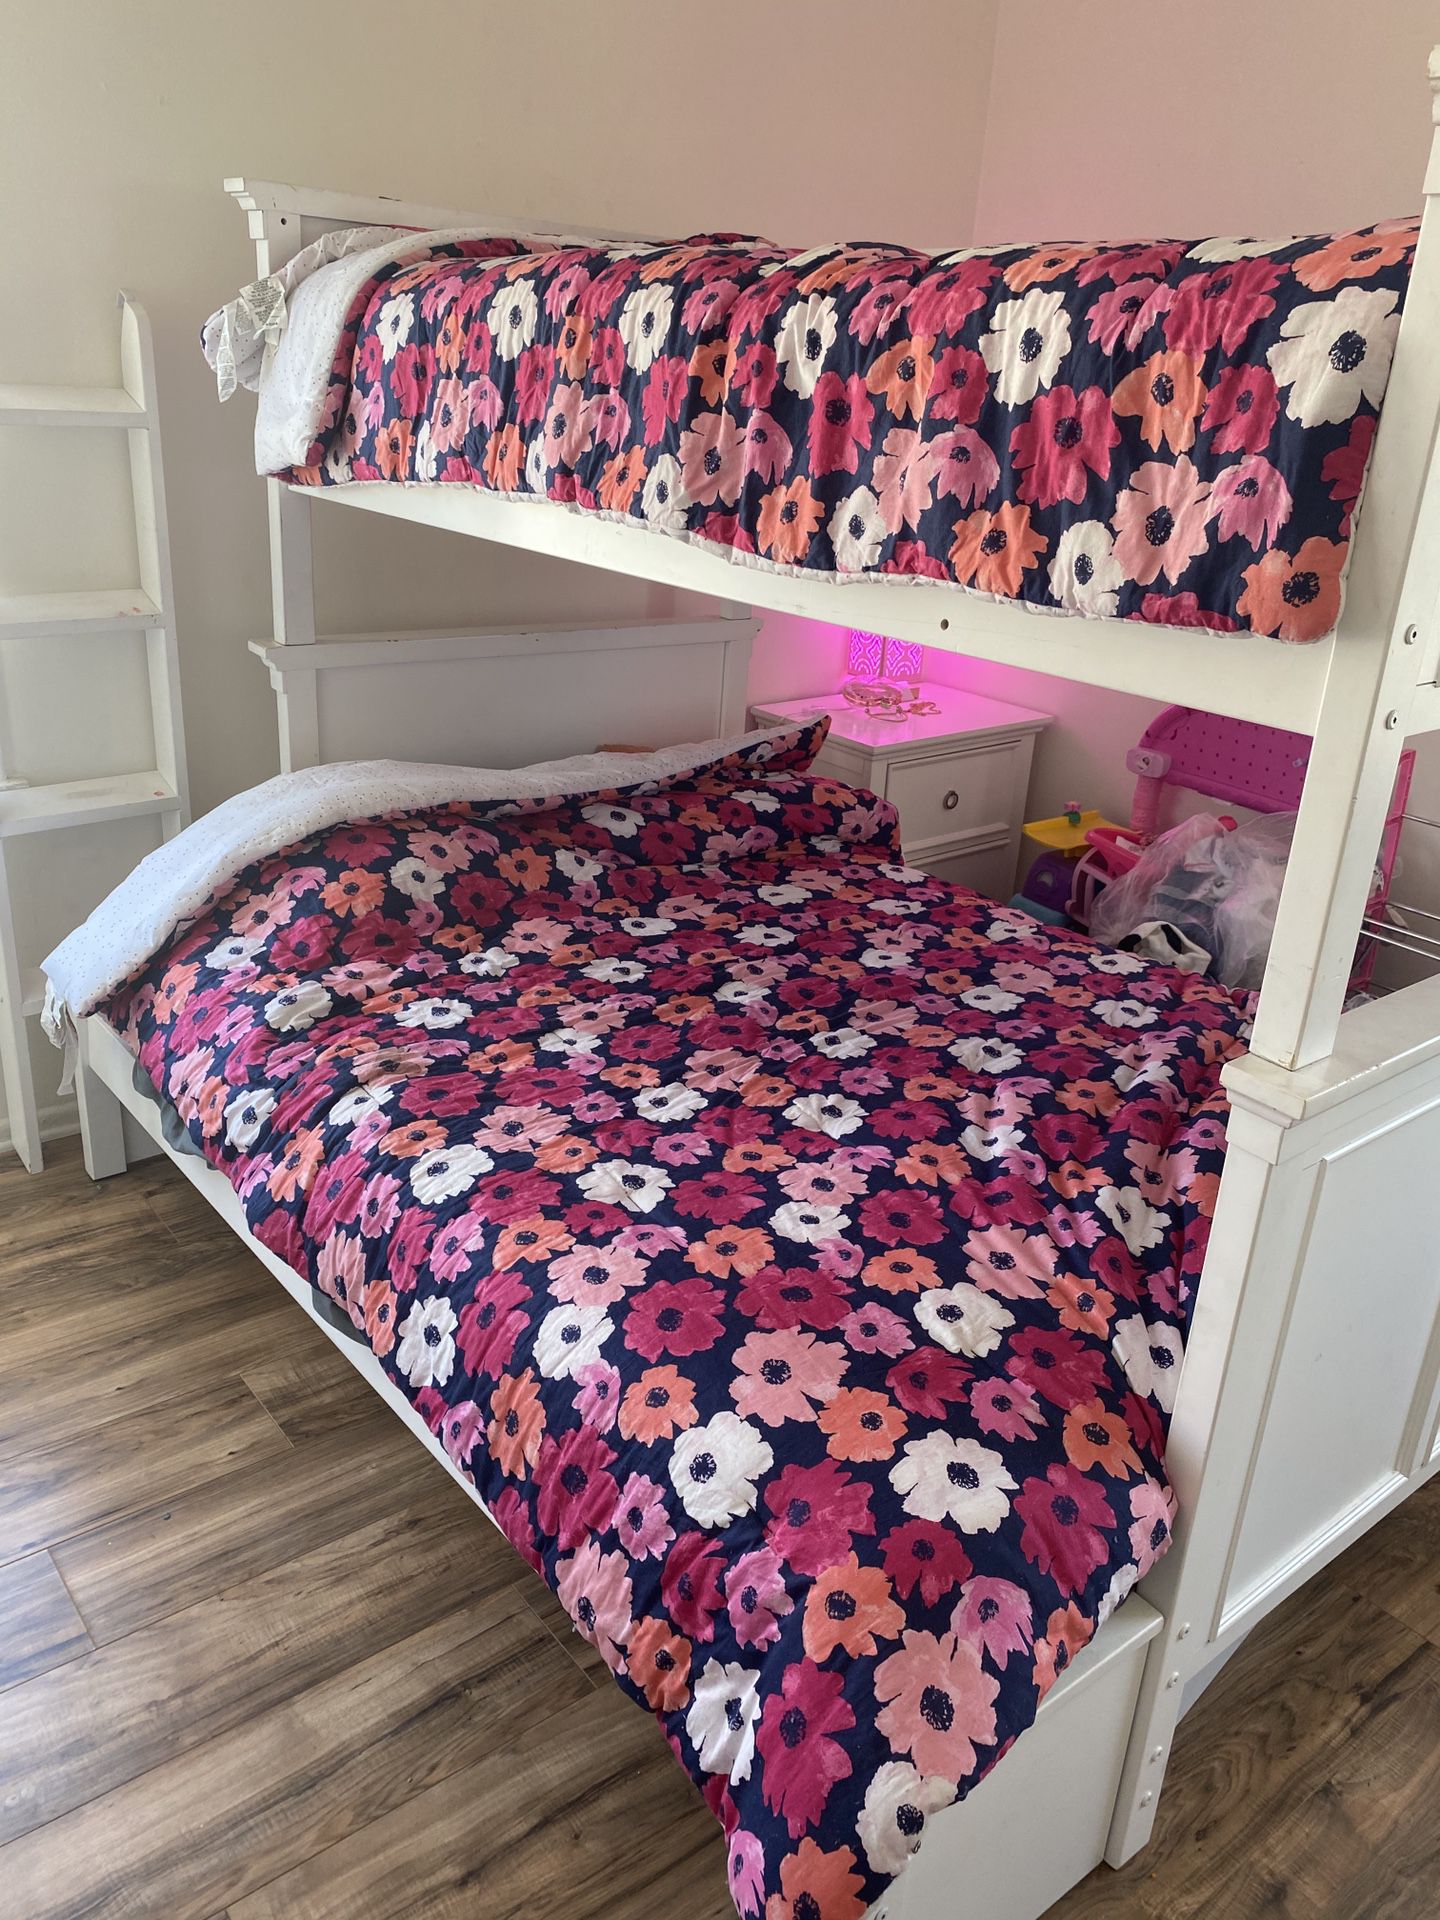 Bunk bed with foster full size mattress and foster twin mattress